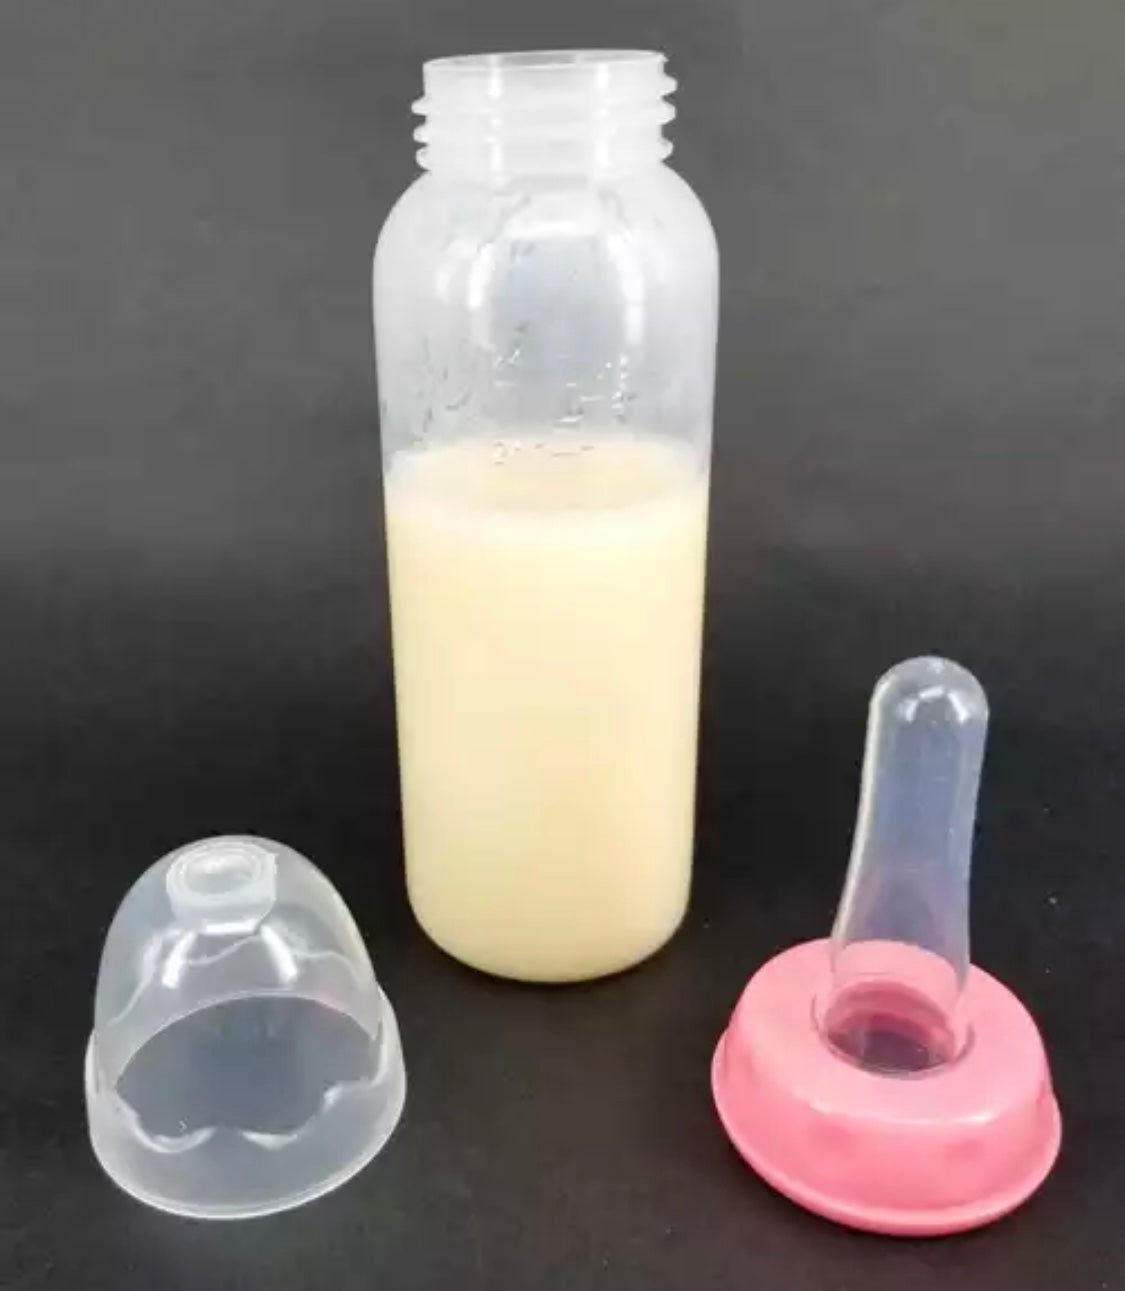 DDLGVERSE adult sized baby bottle with teat and pink cap